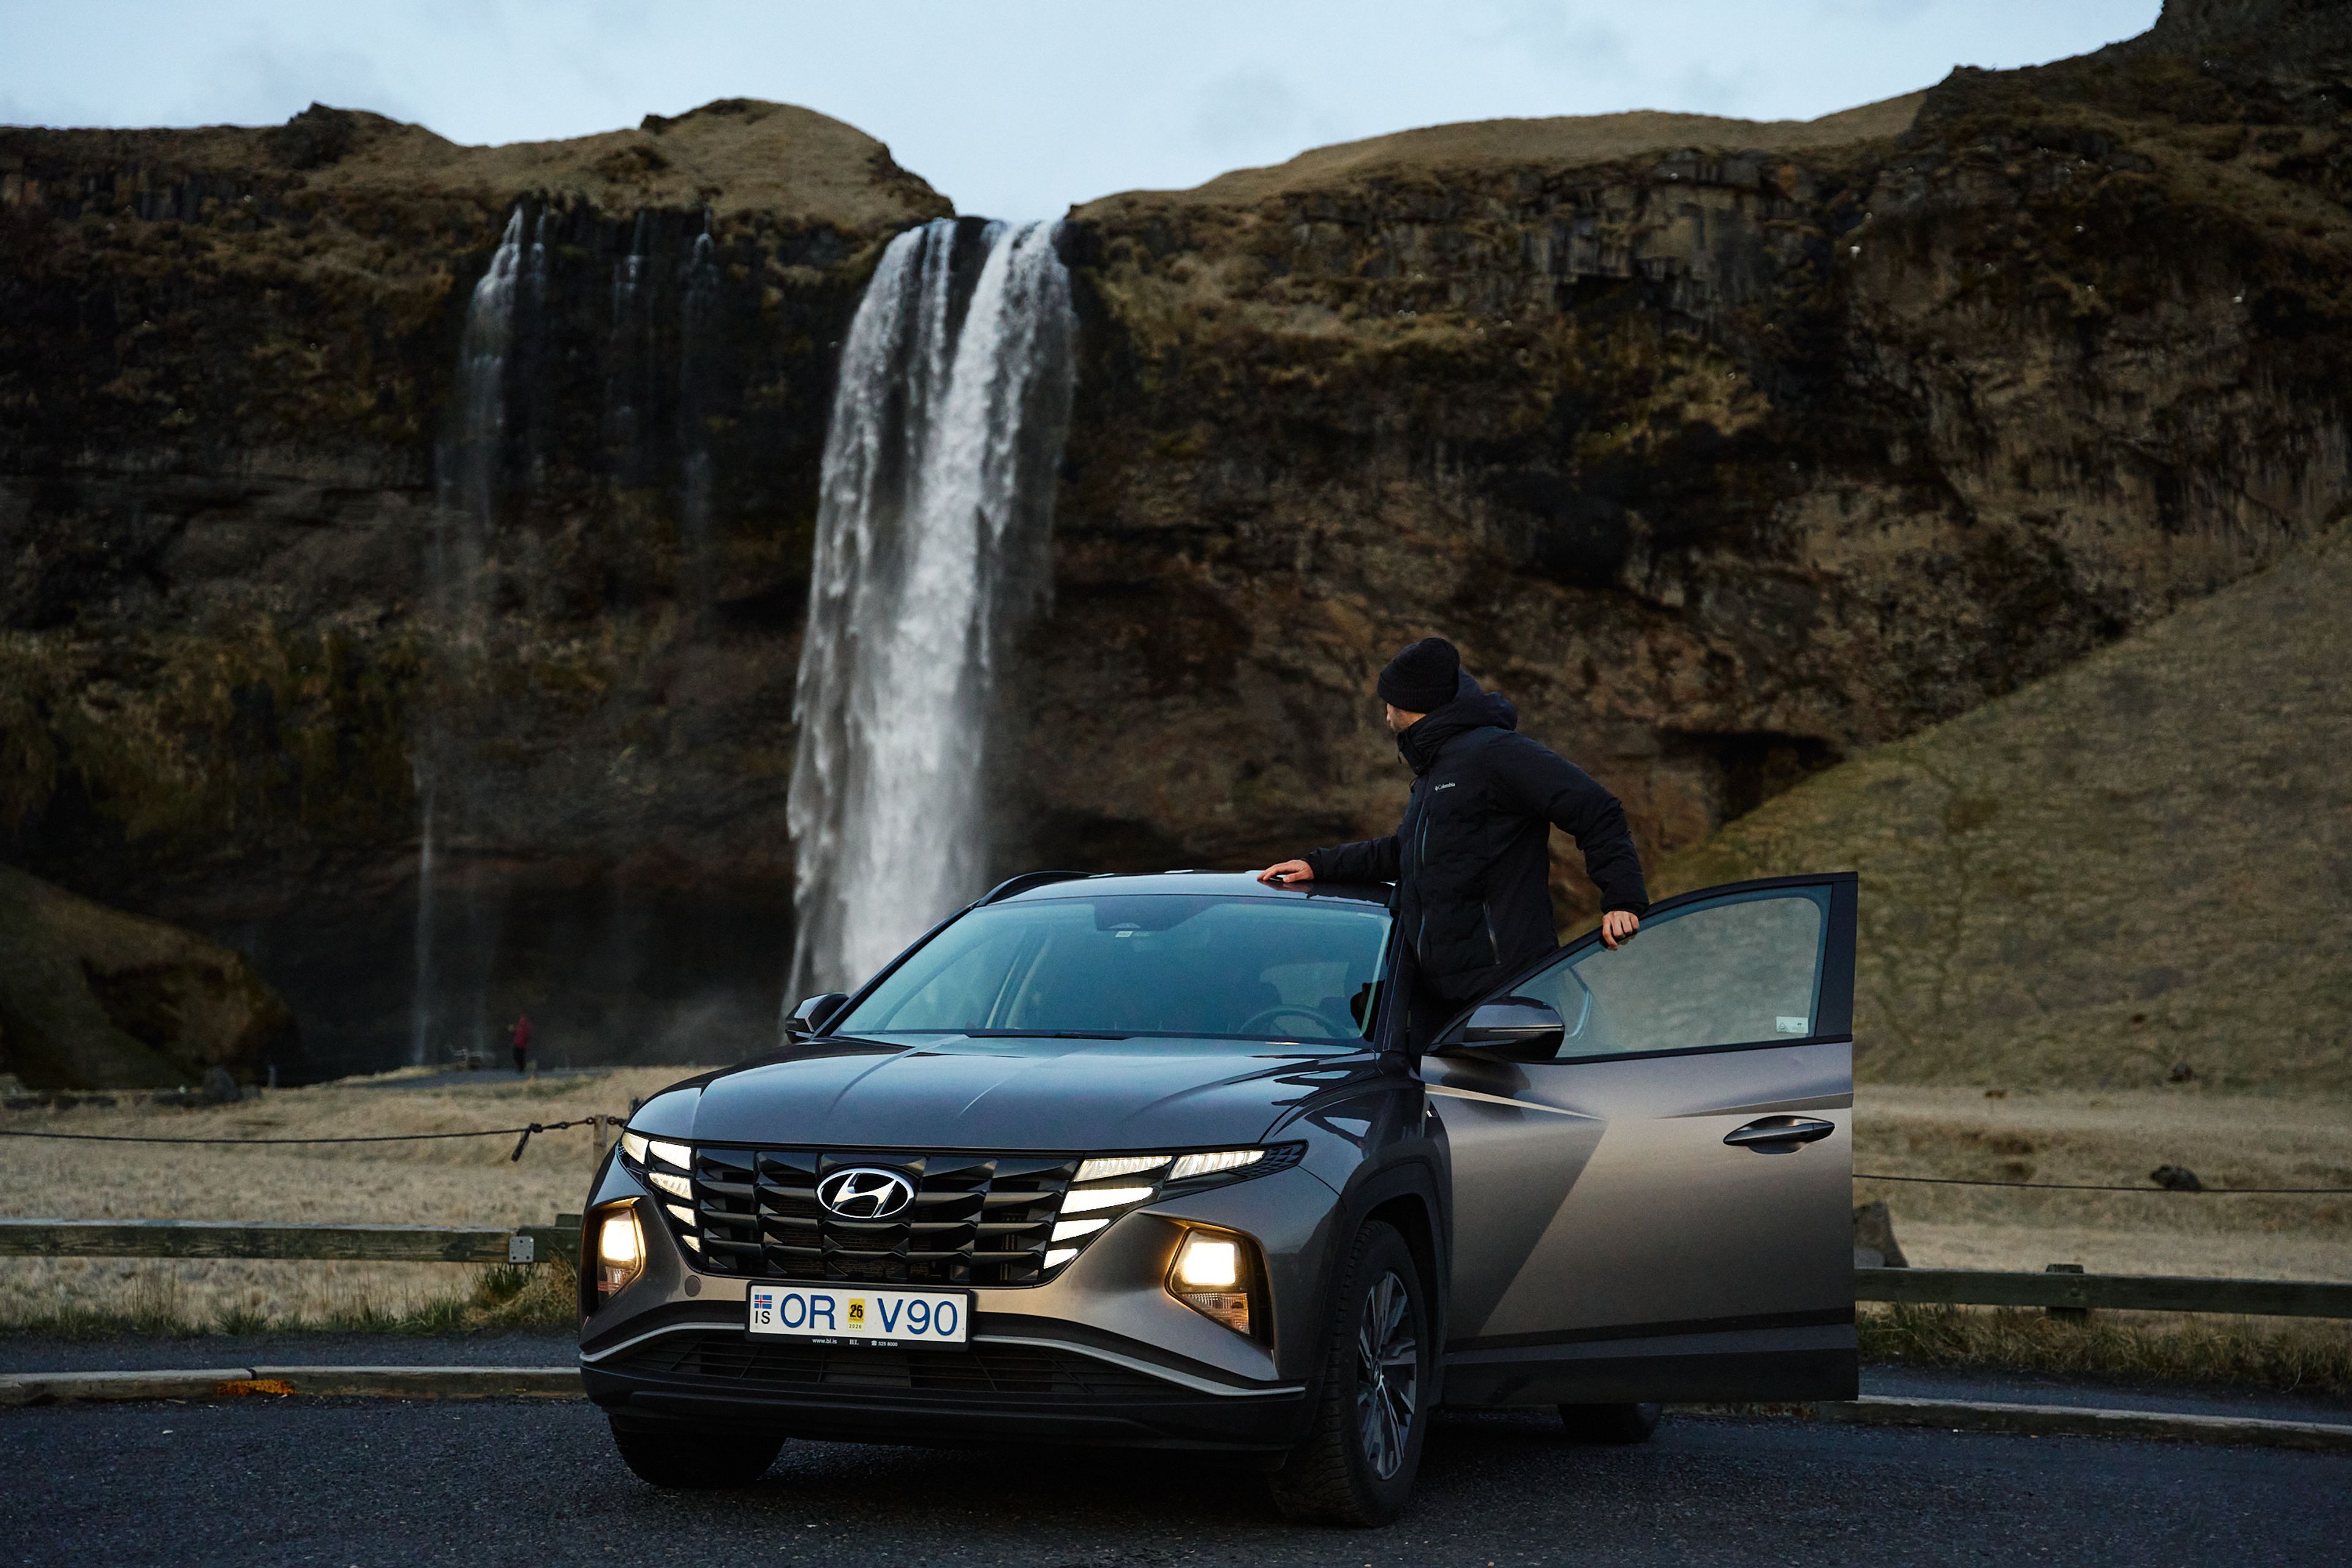 A man standing next to his rental car while looking at a waterfall